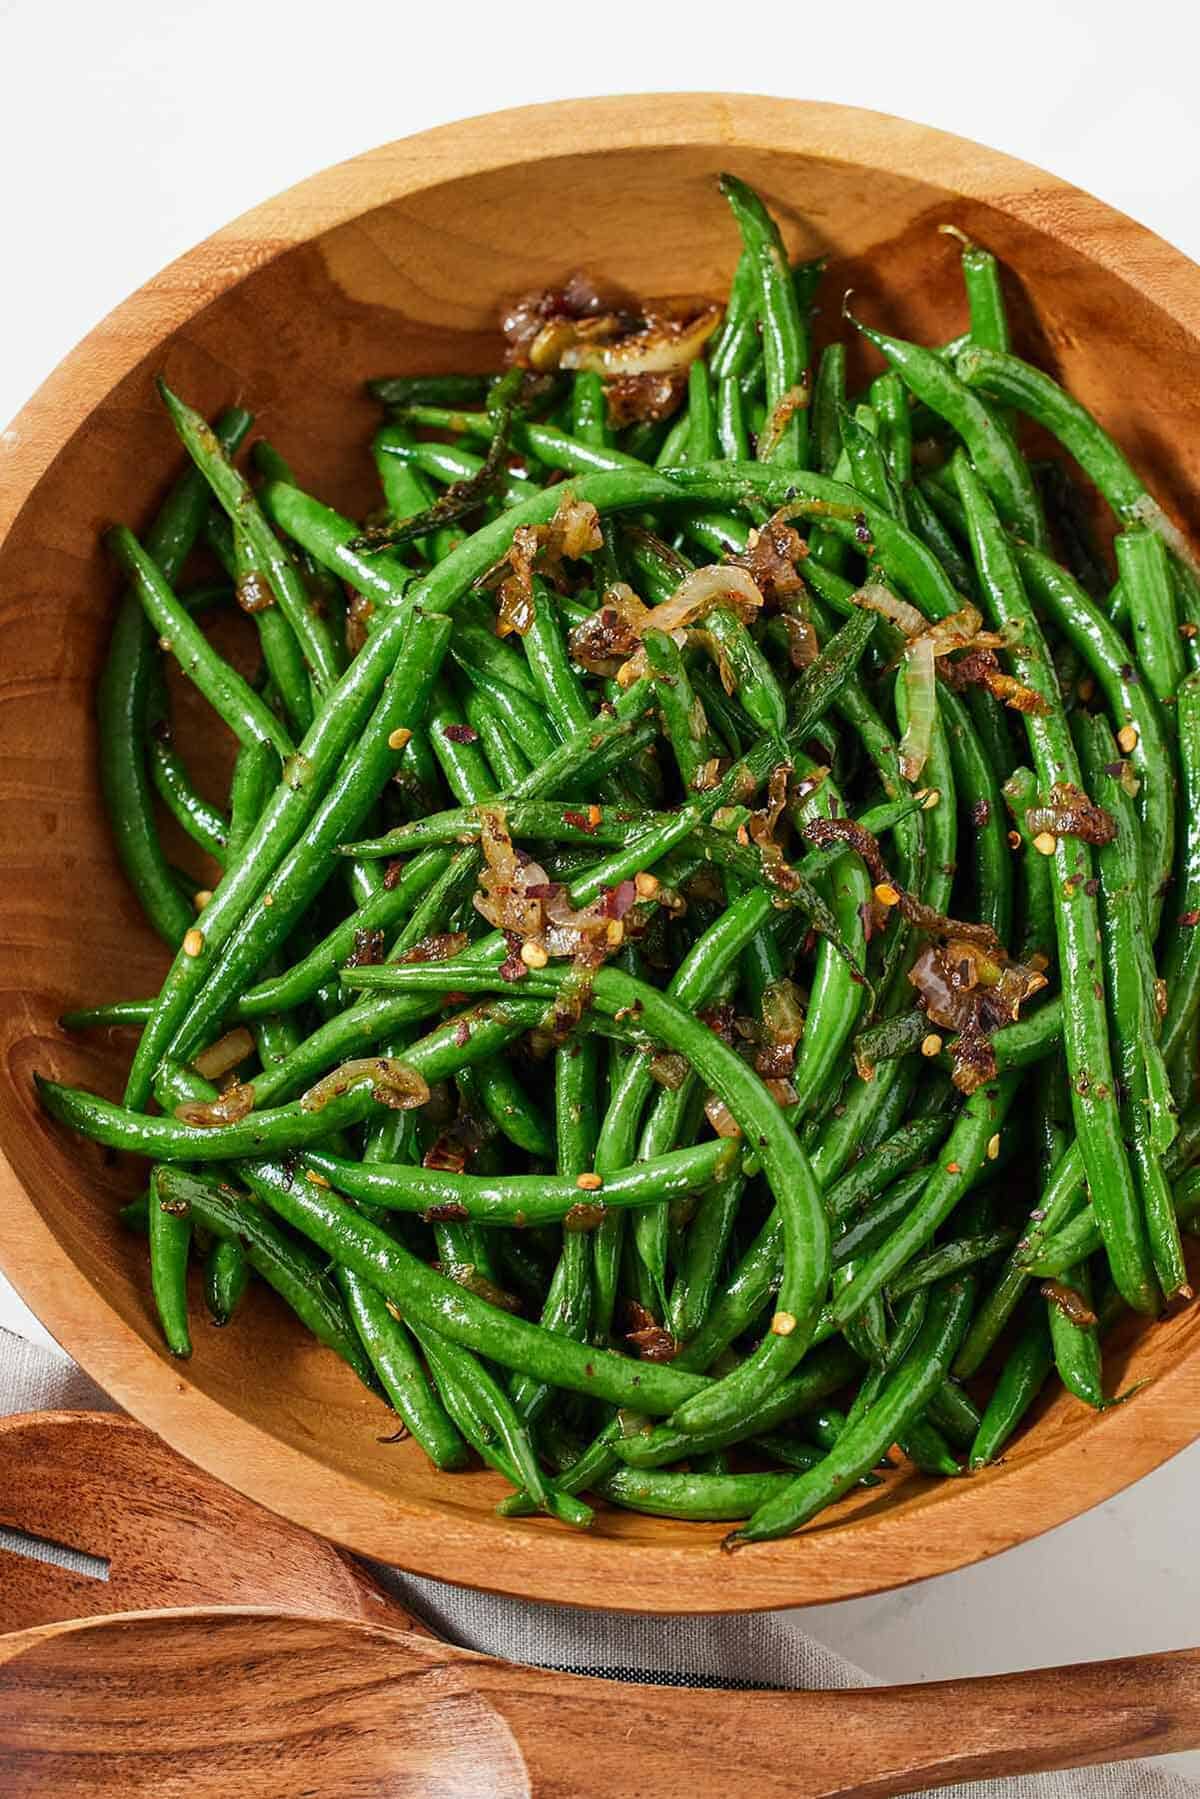 Overhead view of a wooden bowl with crispy shallot green beans.